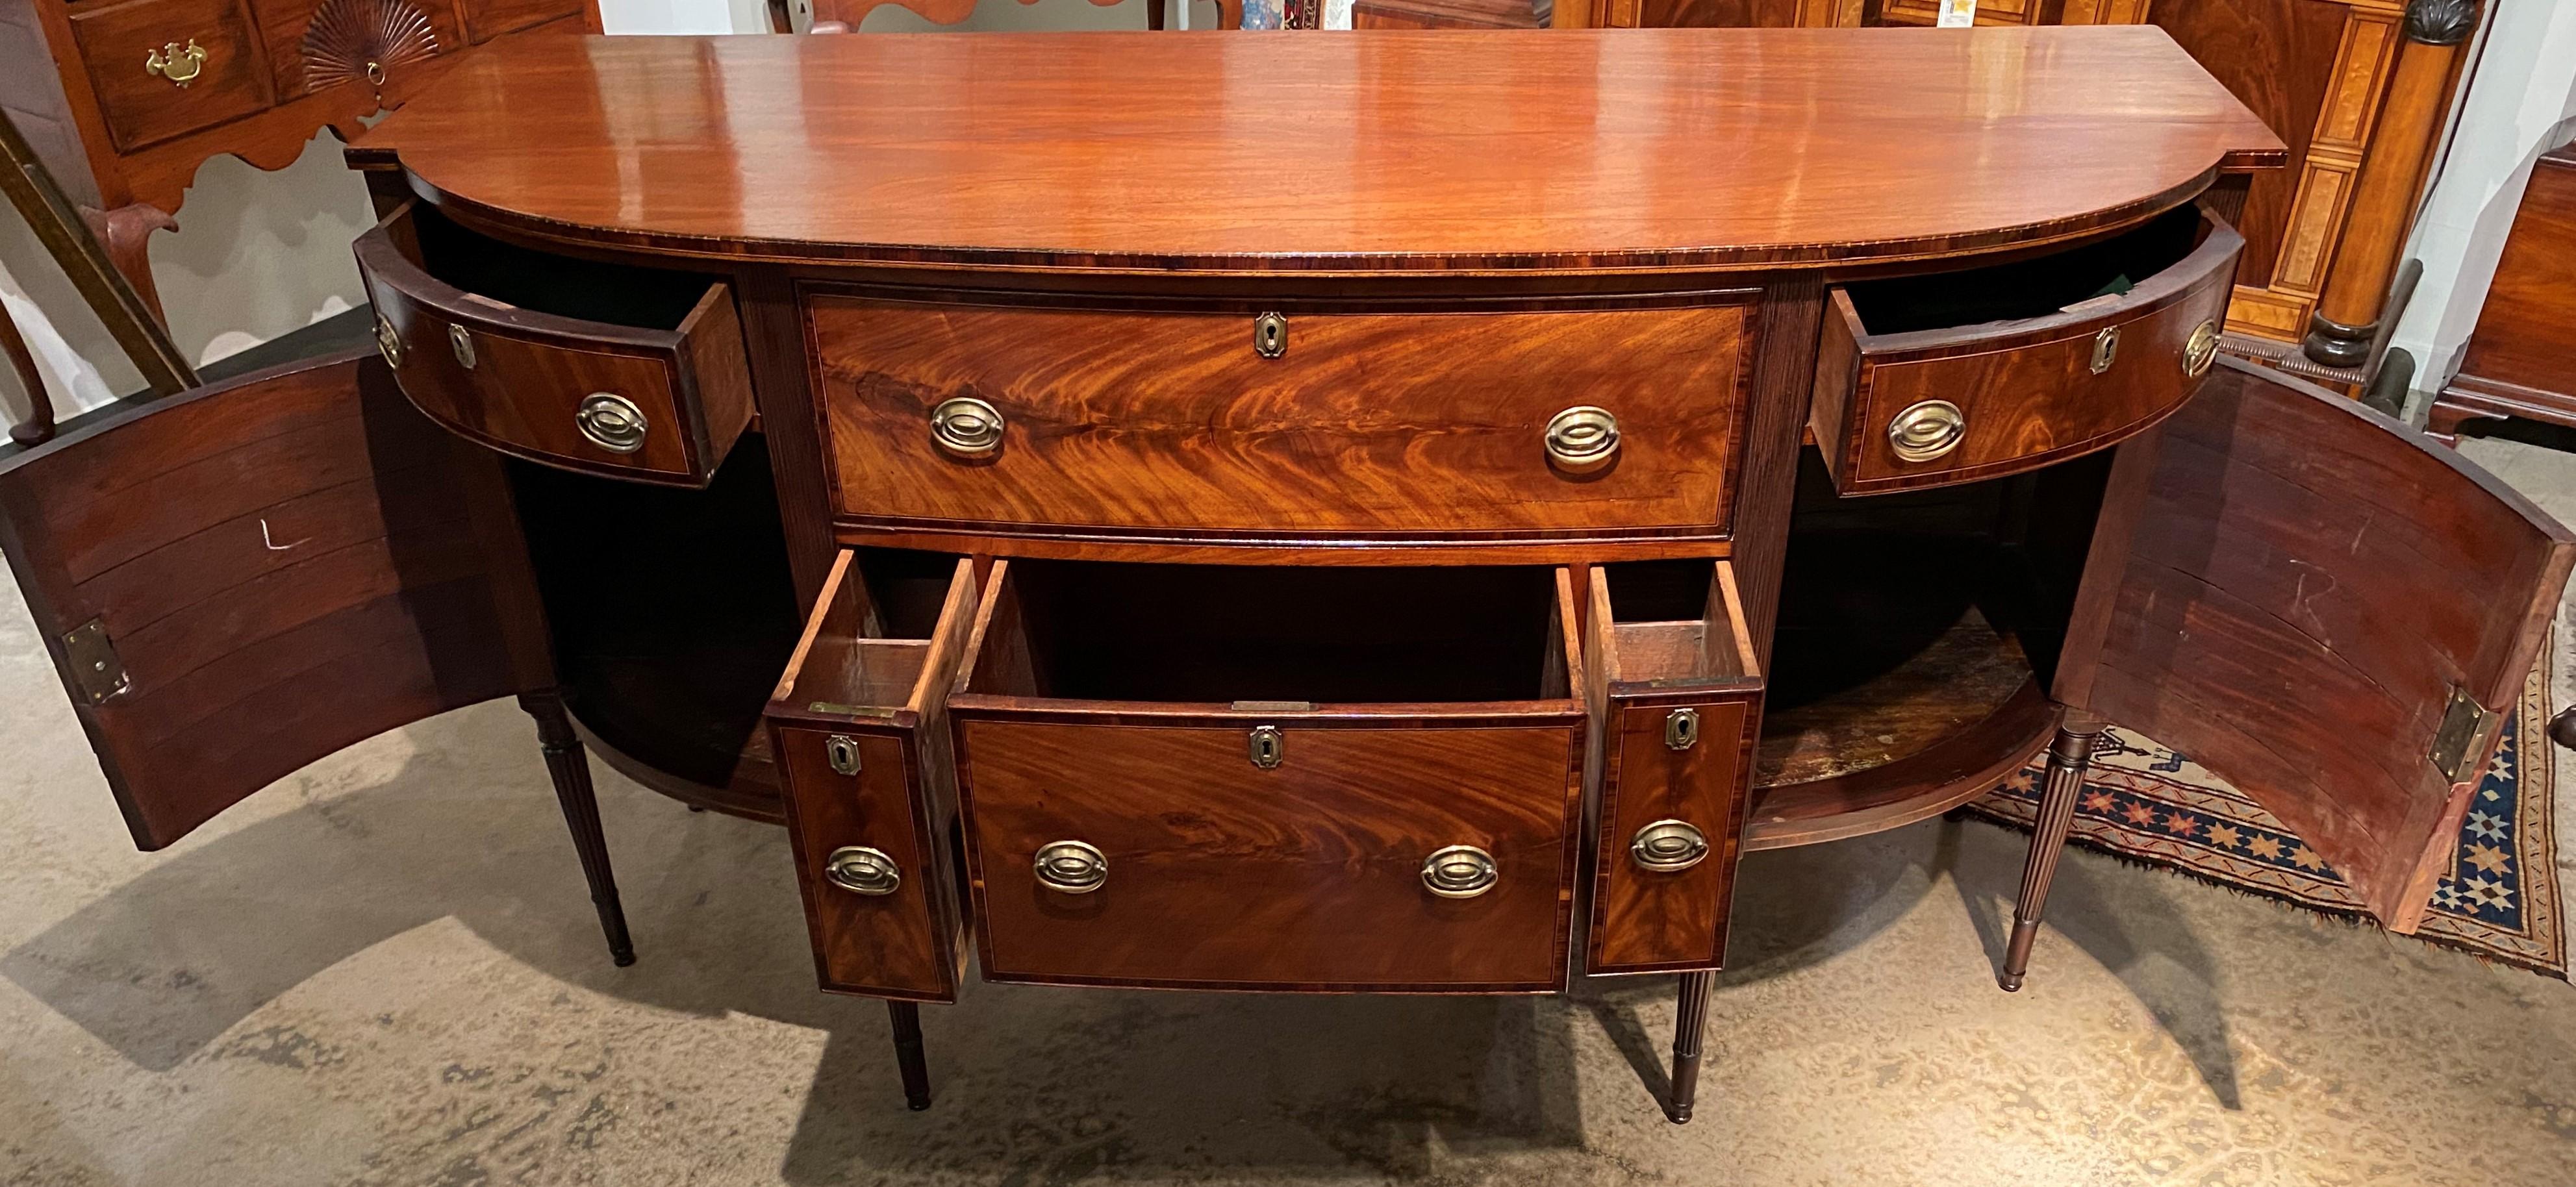 Federal Boston Mahogany Sideboard Attributed to the Seymour Workshop 2